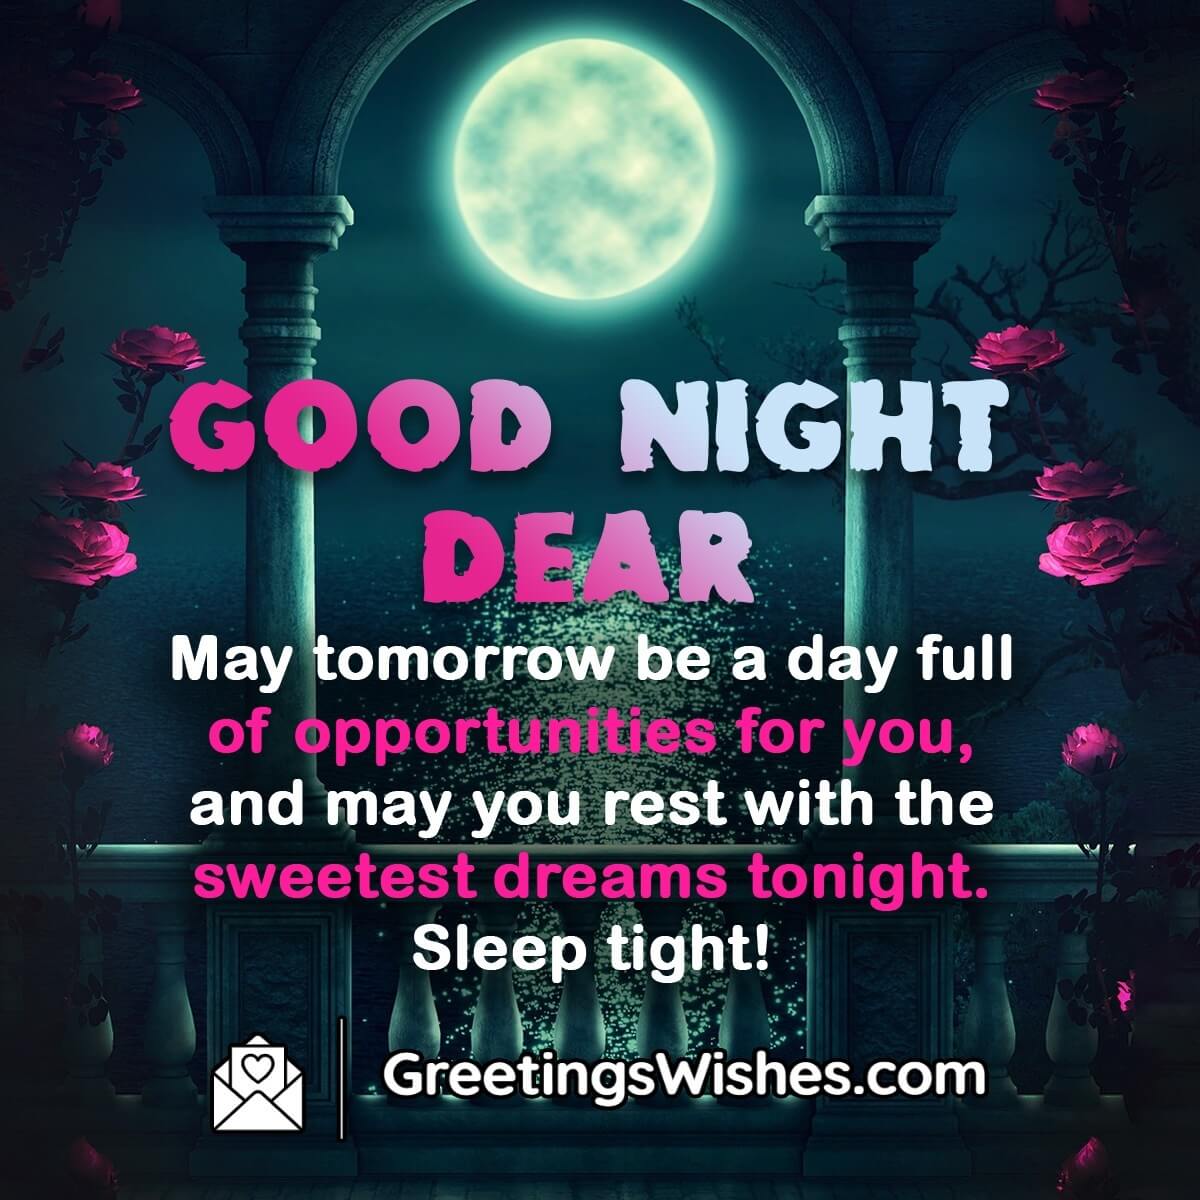 Good Night Messages for Friends